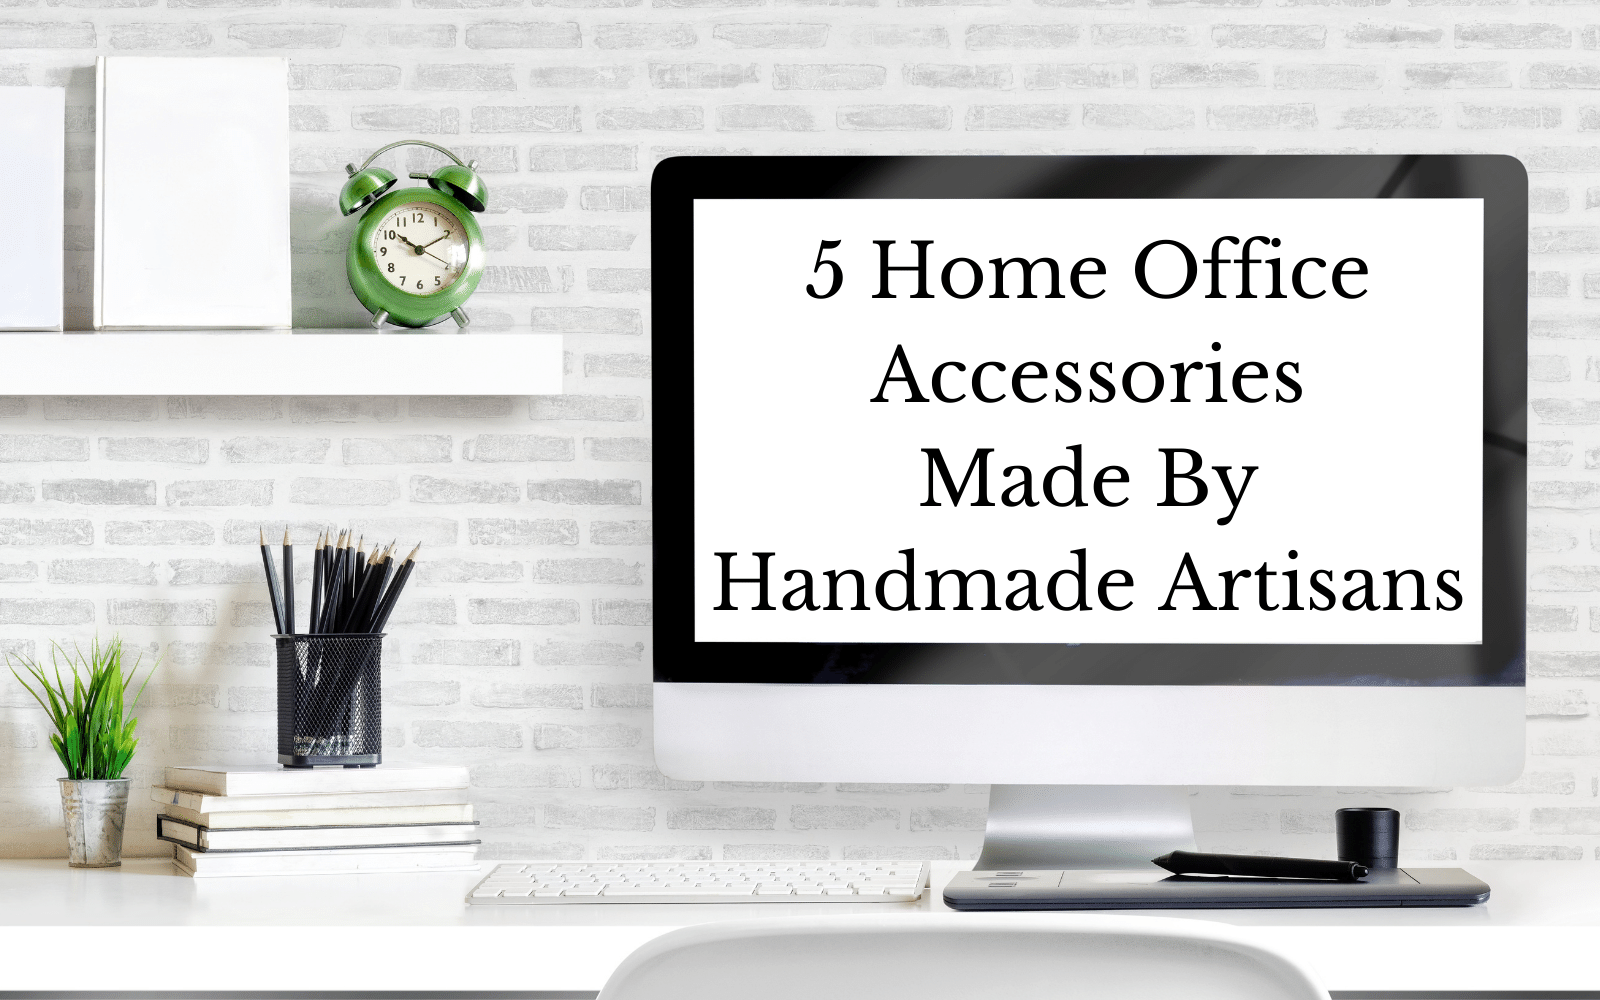 5 Home Office Accessories Made By Handmade Artisans